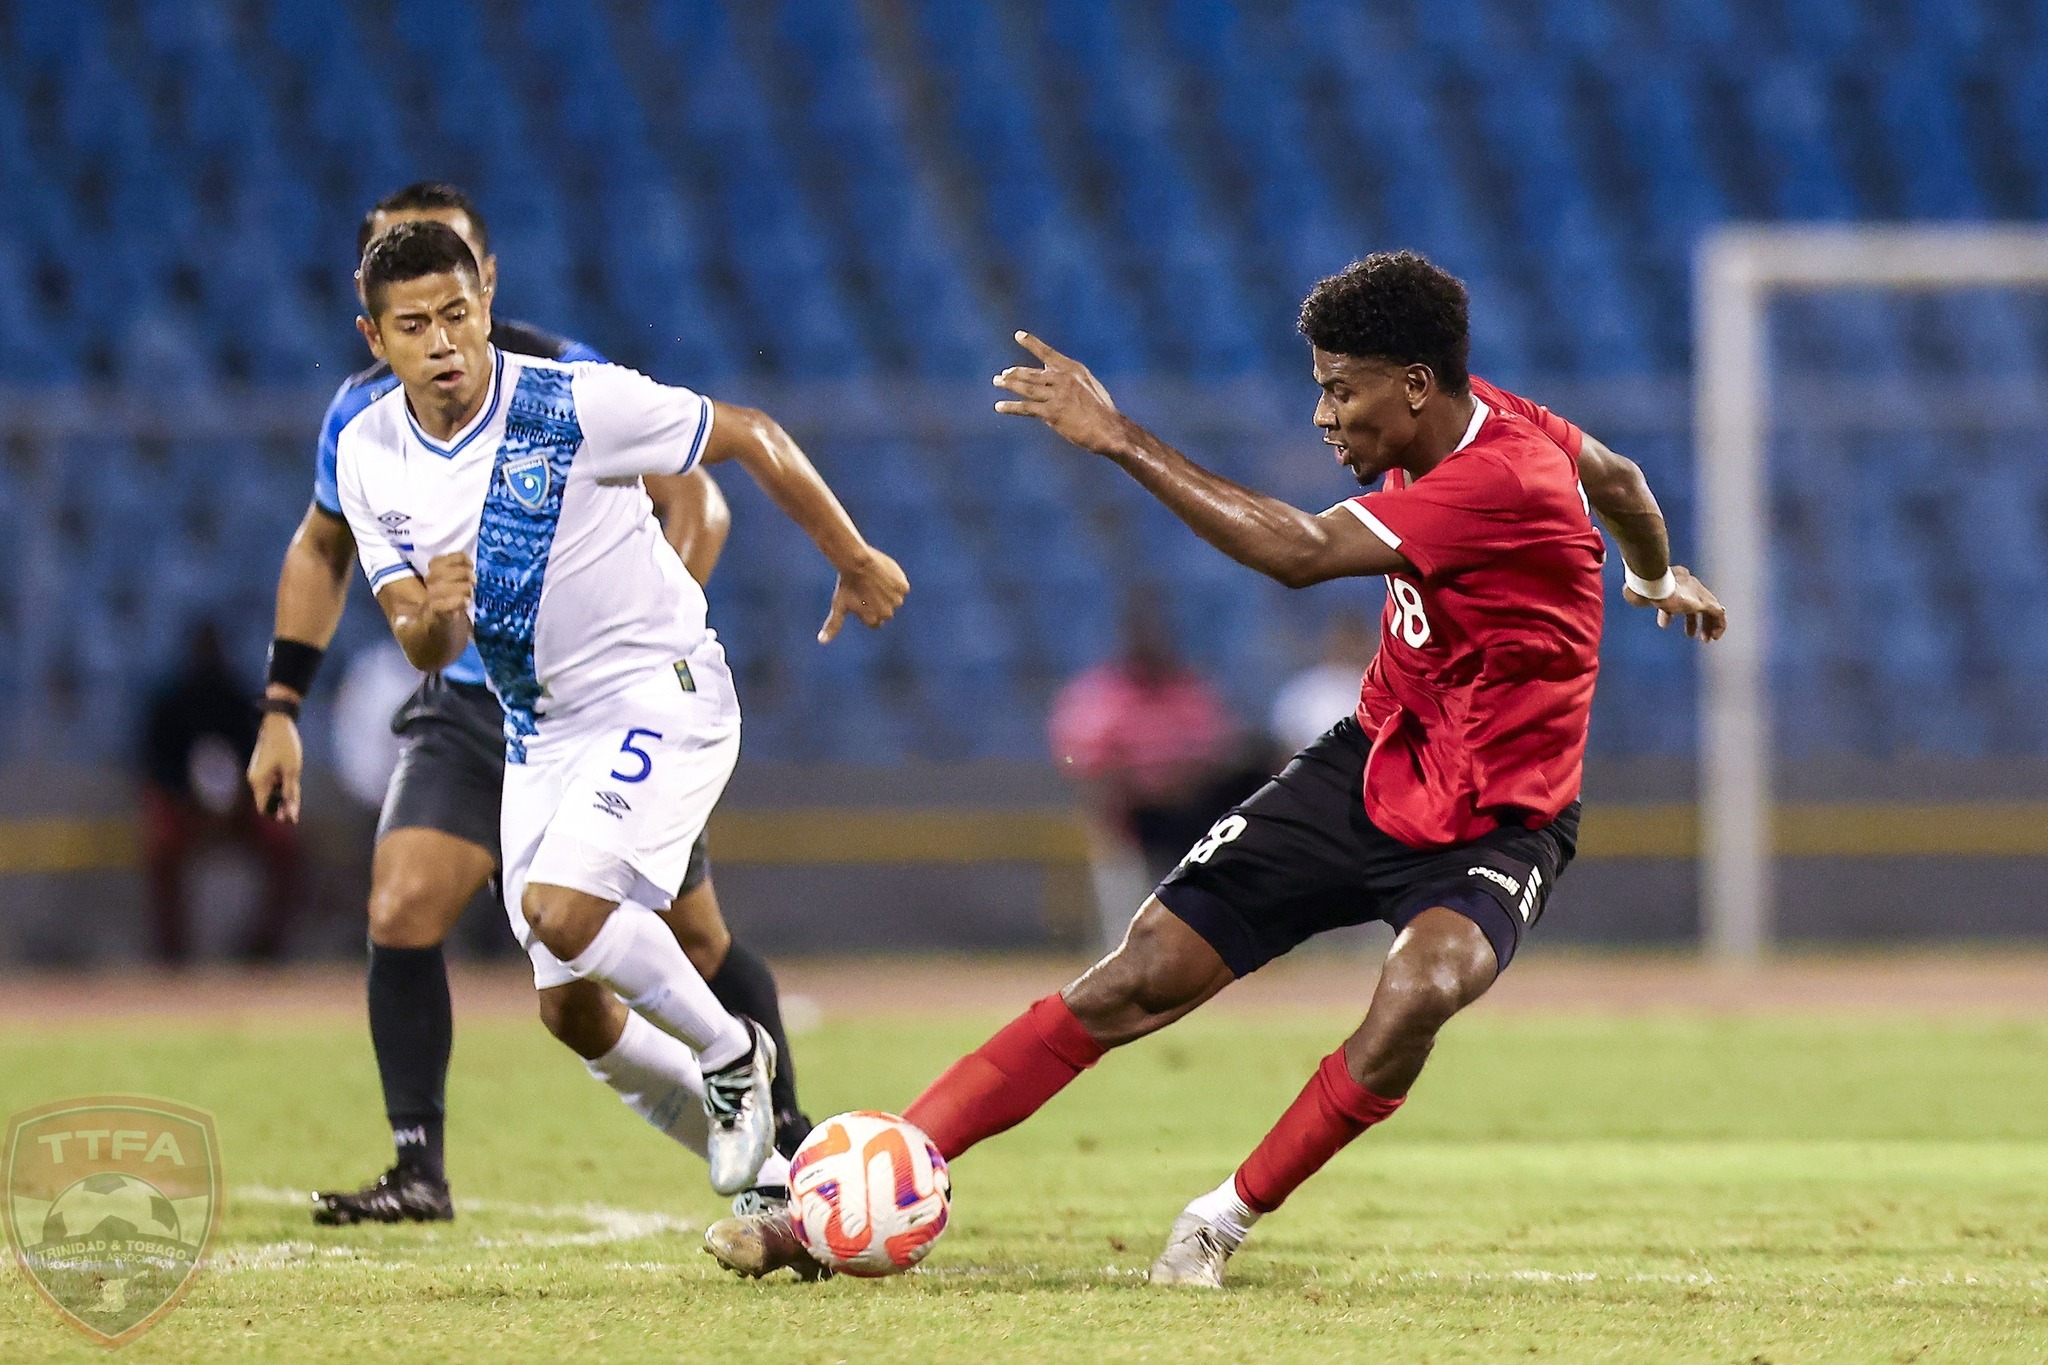 TTFA AND FIFA+ TEAM UP FOR GLOBAL AUDIENCE